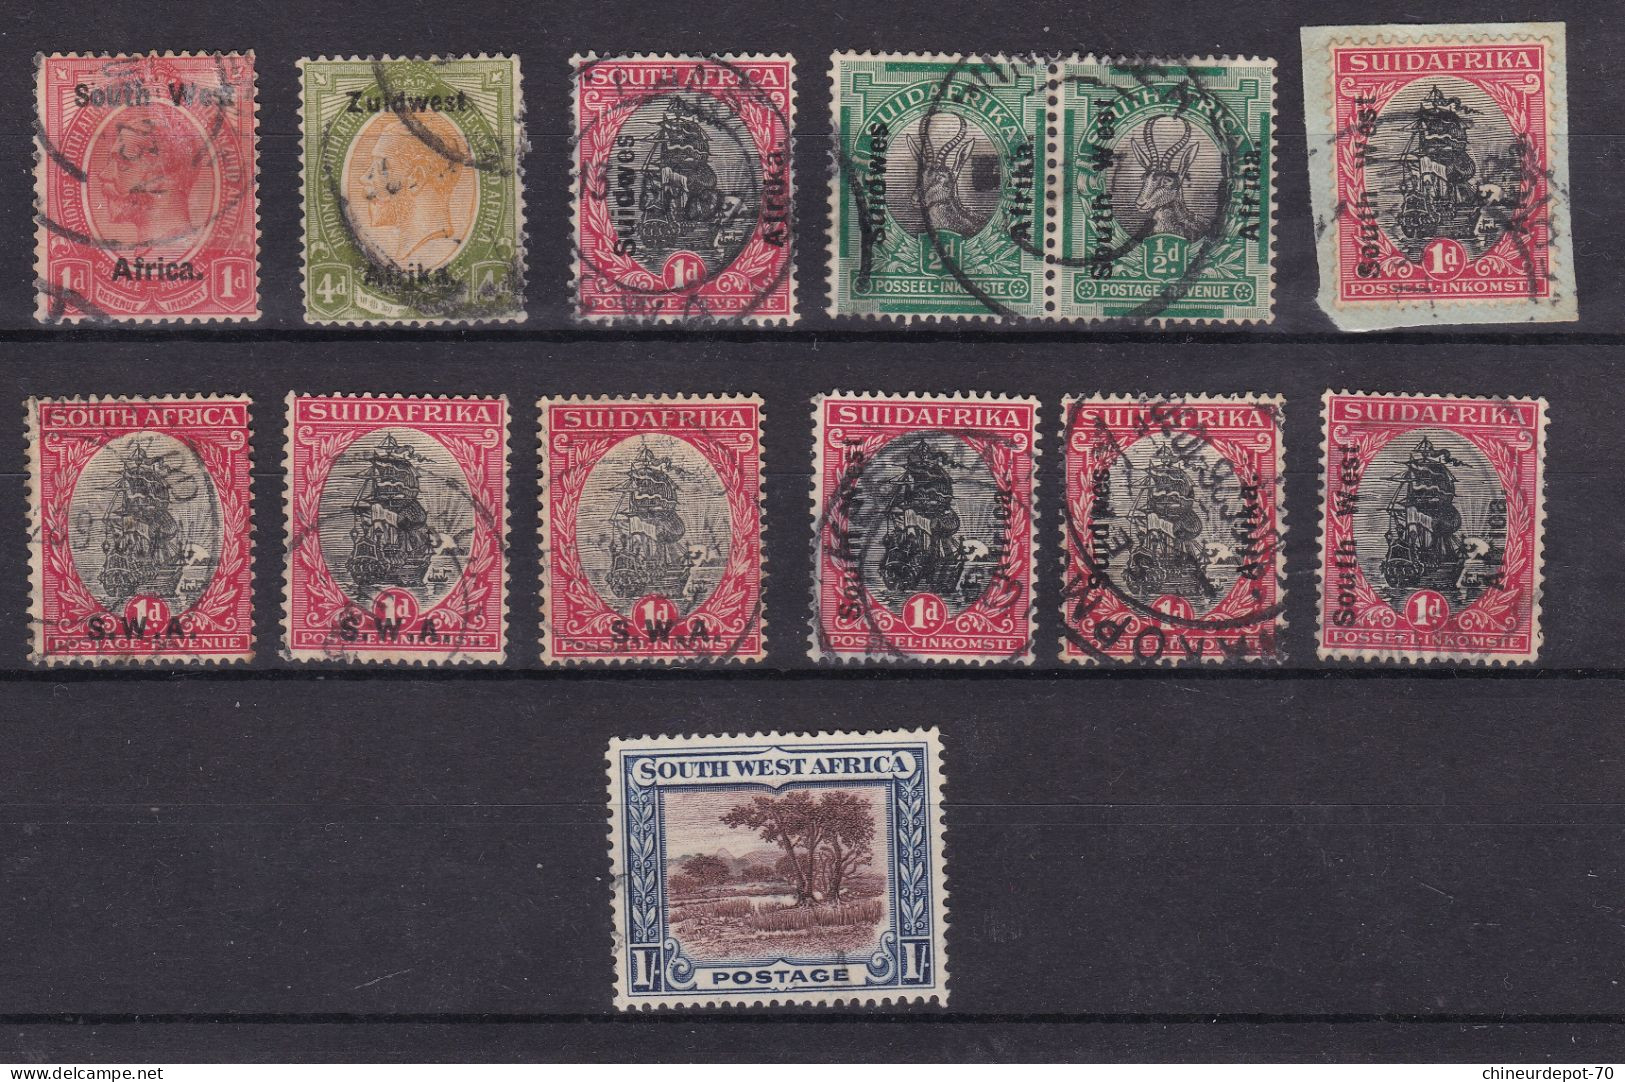 South Africa Sud Afrique Suidafrica Surcharges - Used Stamps